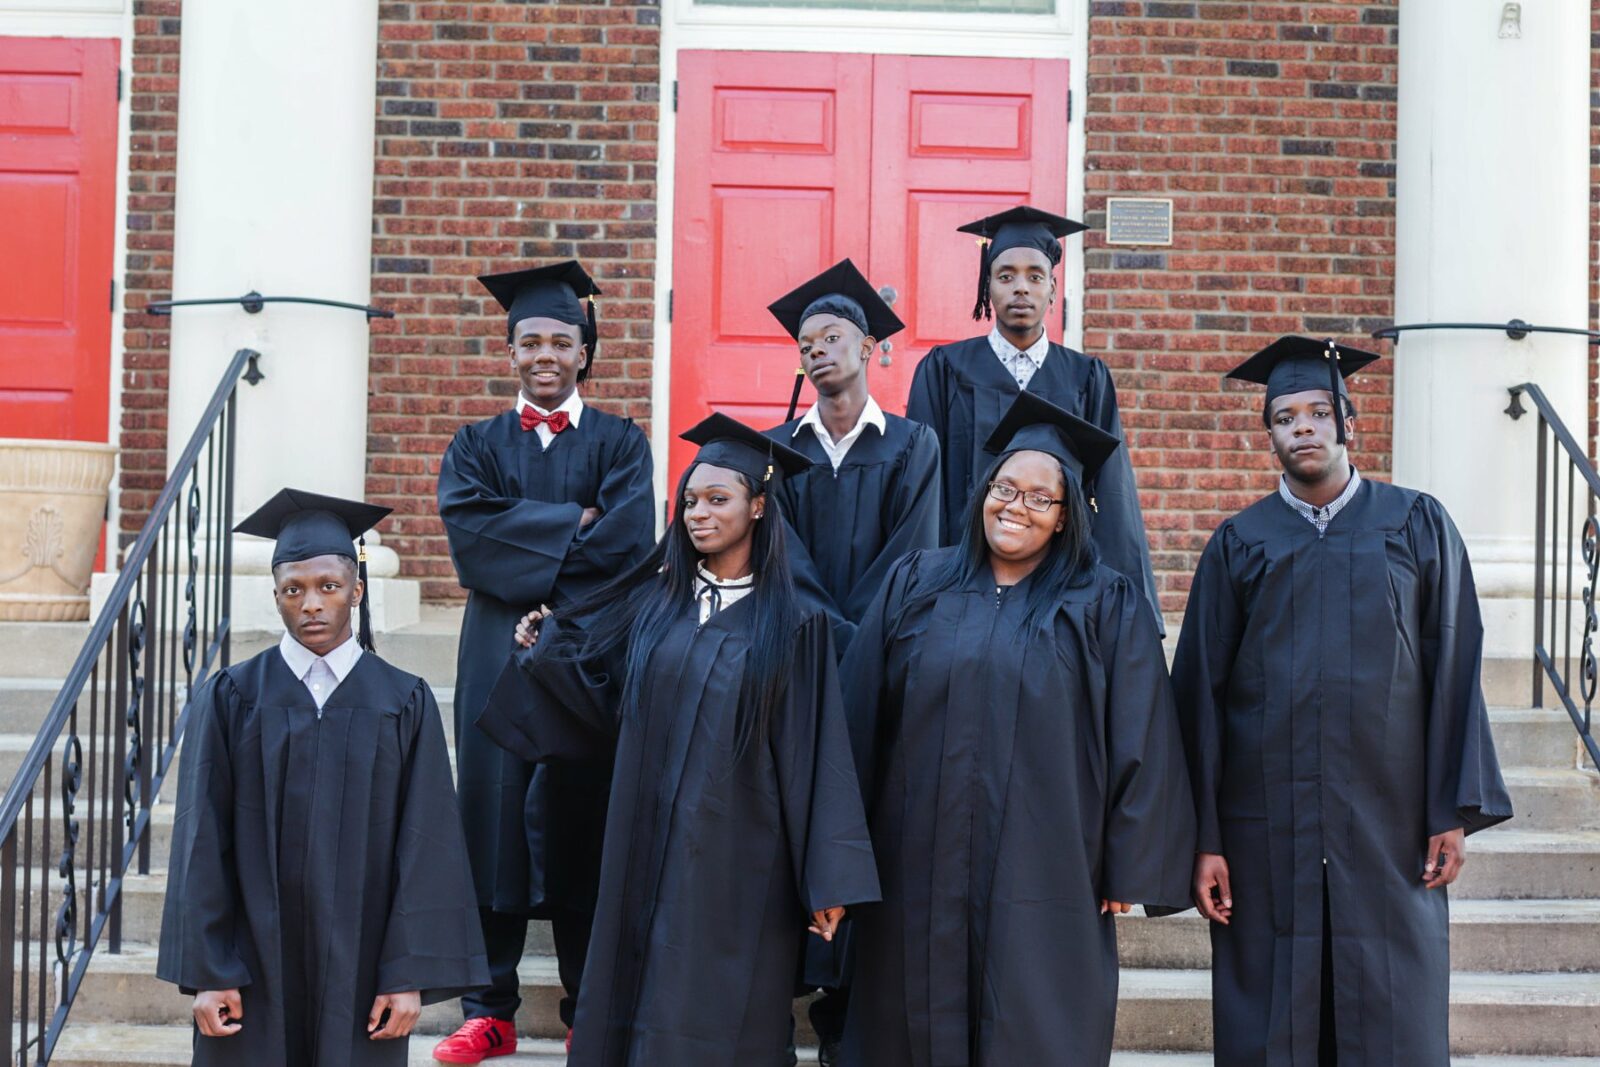 Amid cheers and applause, a group of African American students proudly don their graduation caps and gowns at Triumph School, celebrating their academic achievements and the bright futures that lie ahead.